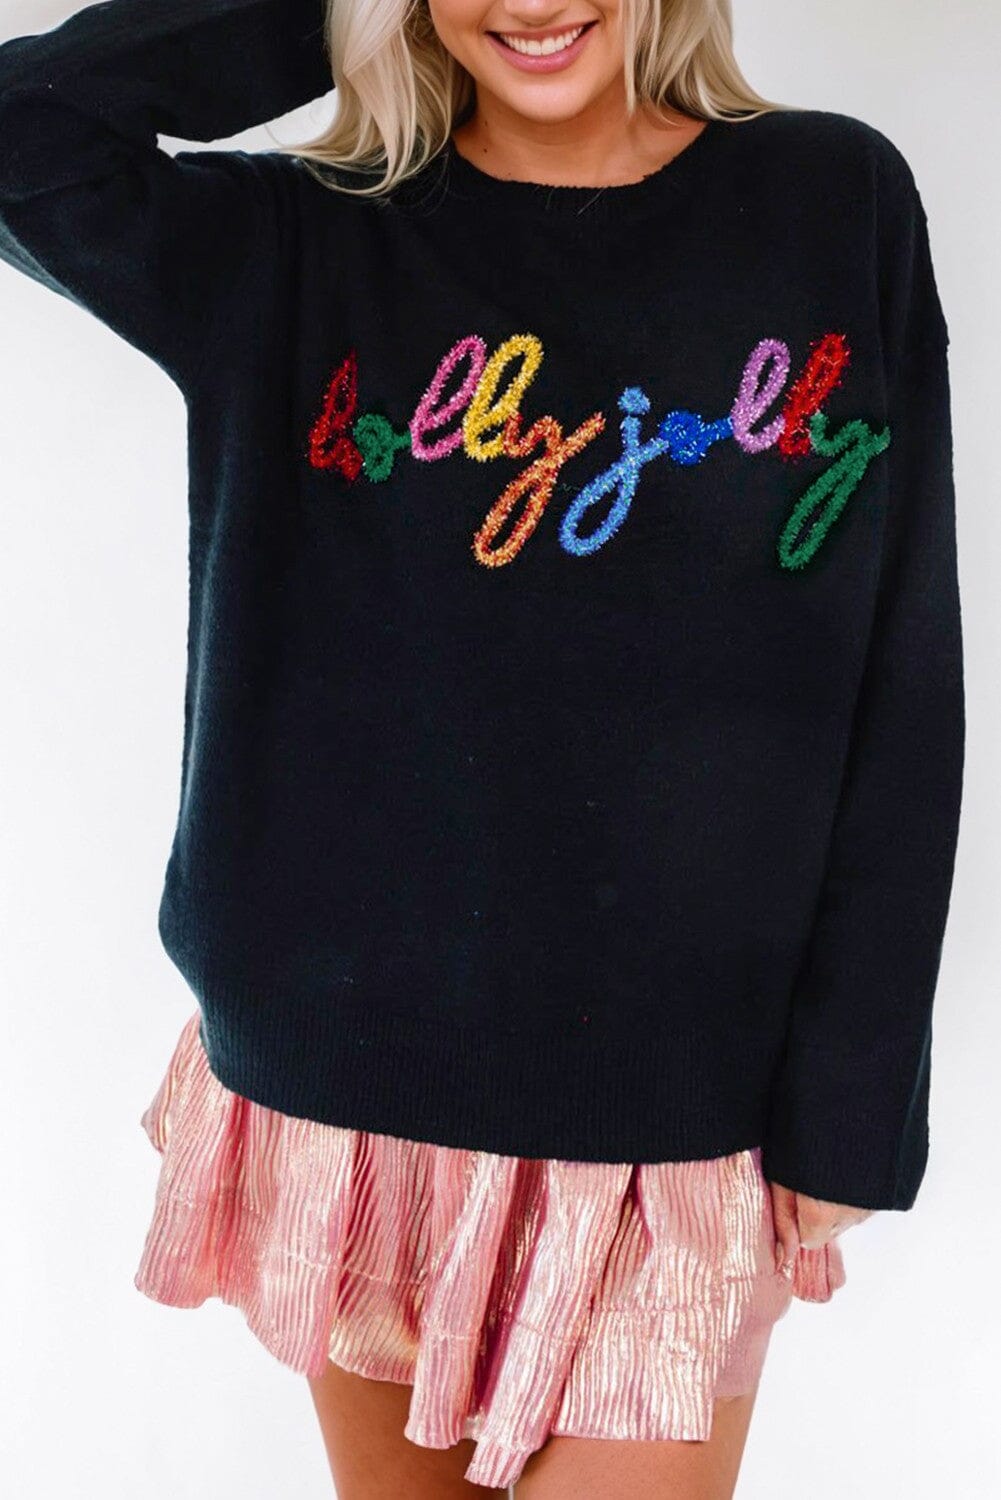 Holly Jolly New SWEATER Shiying 